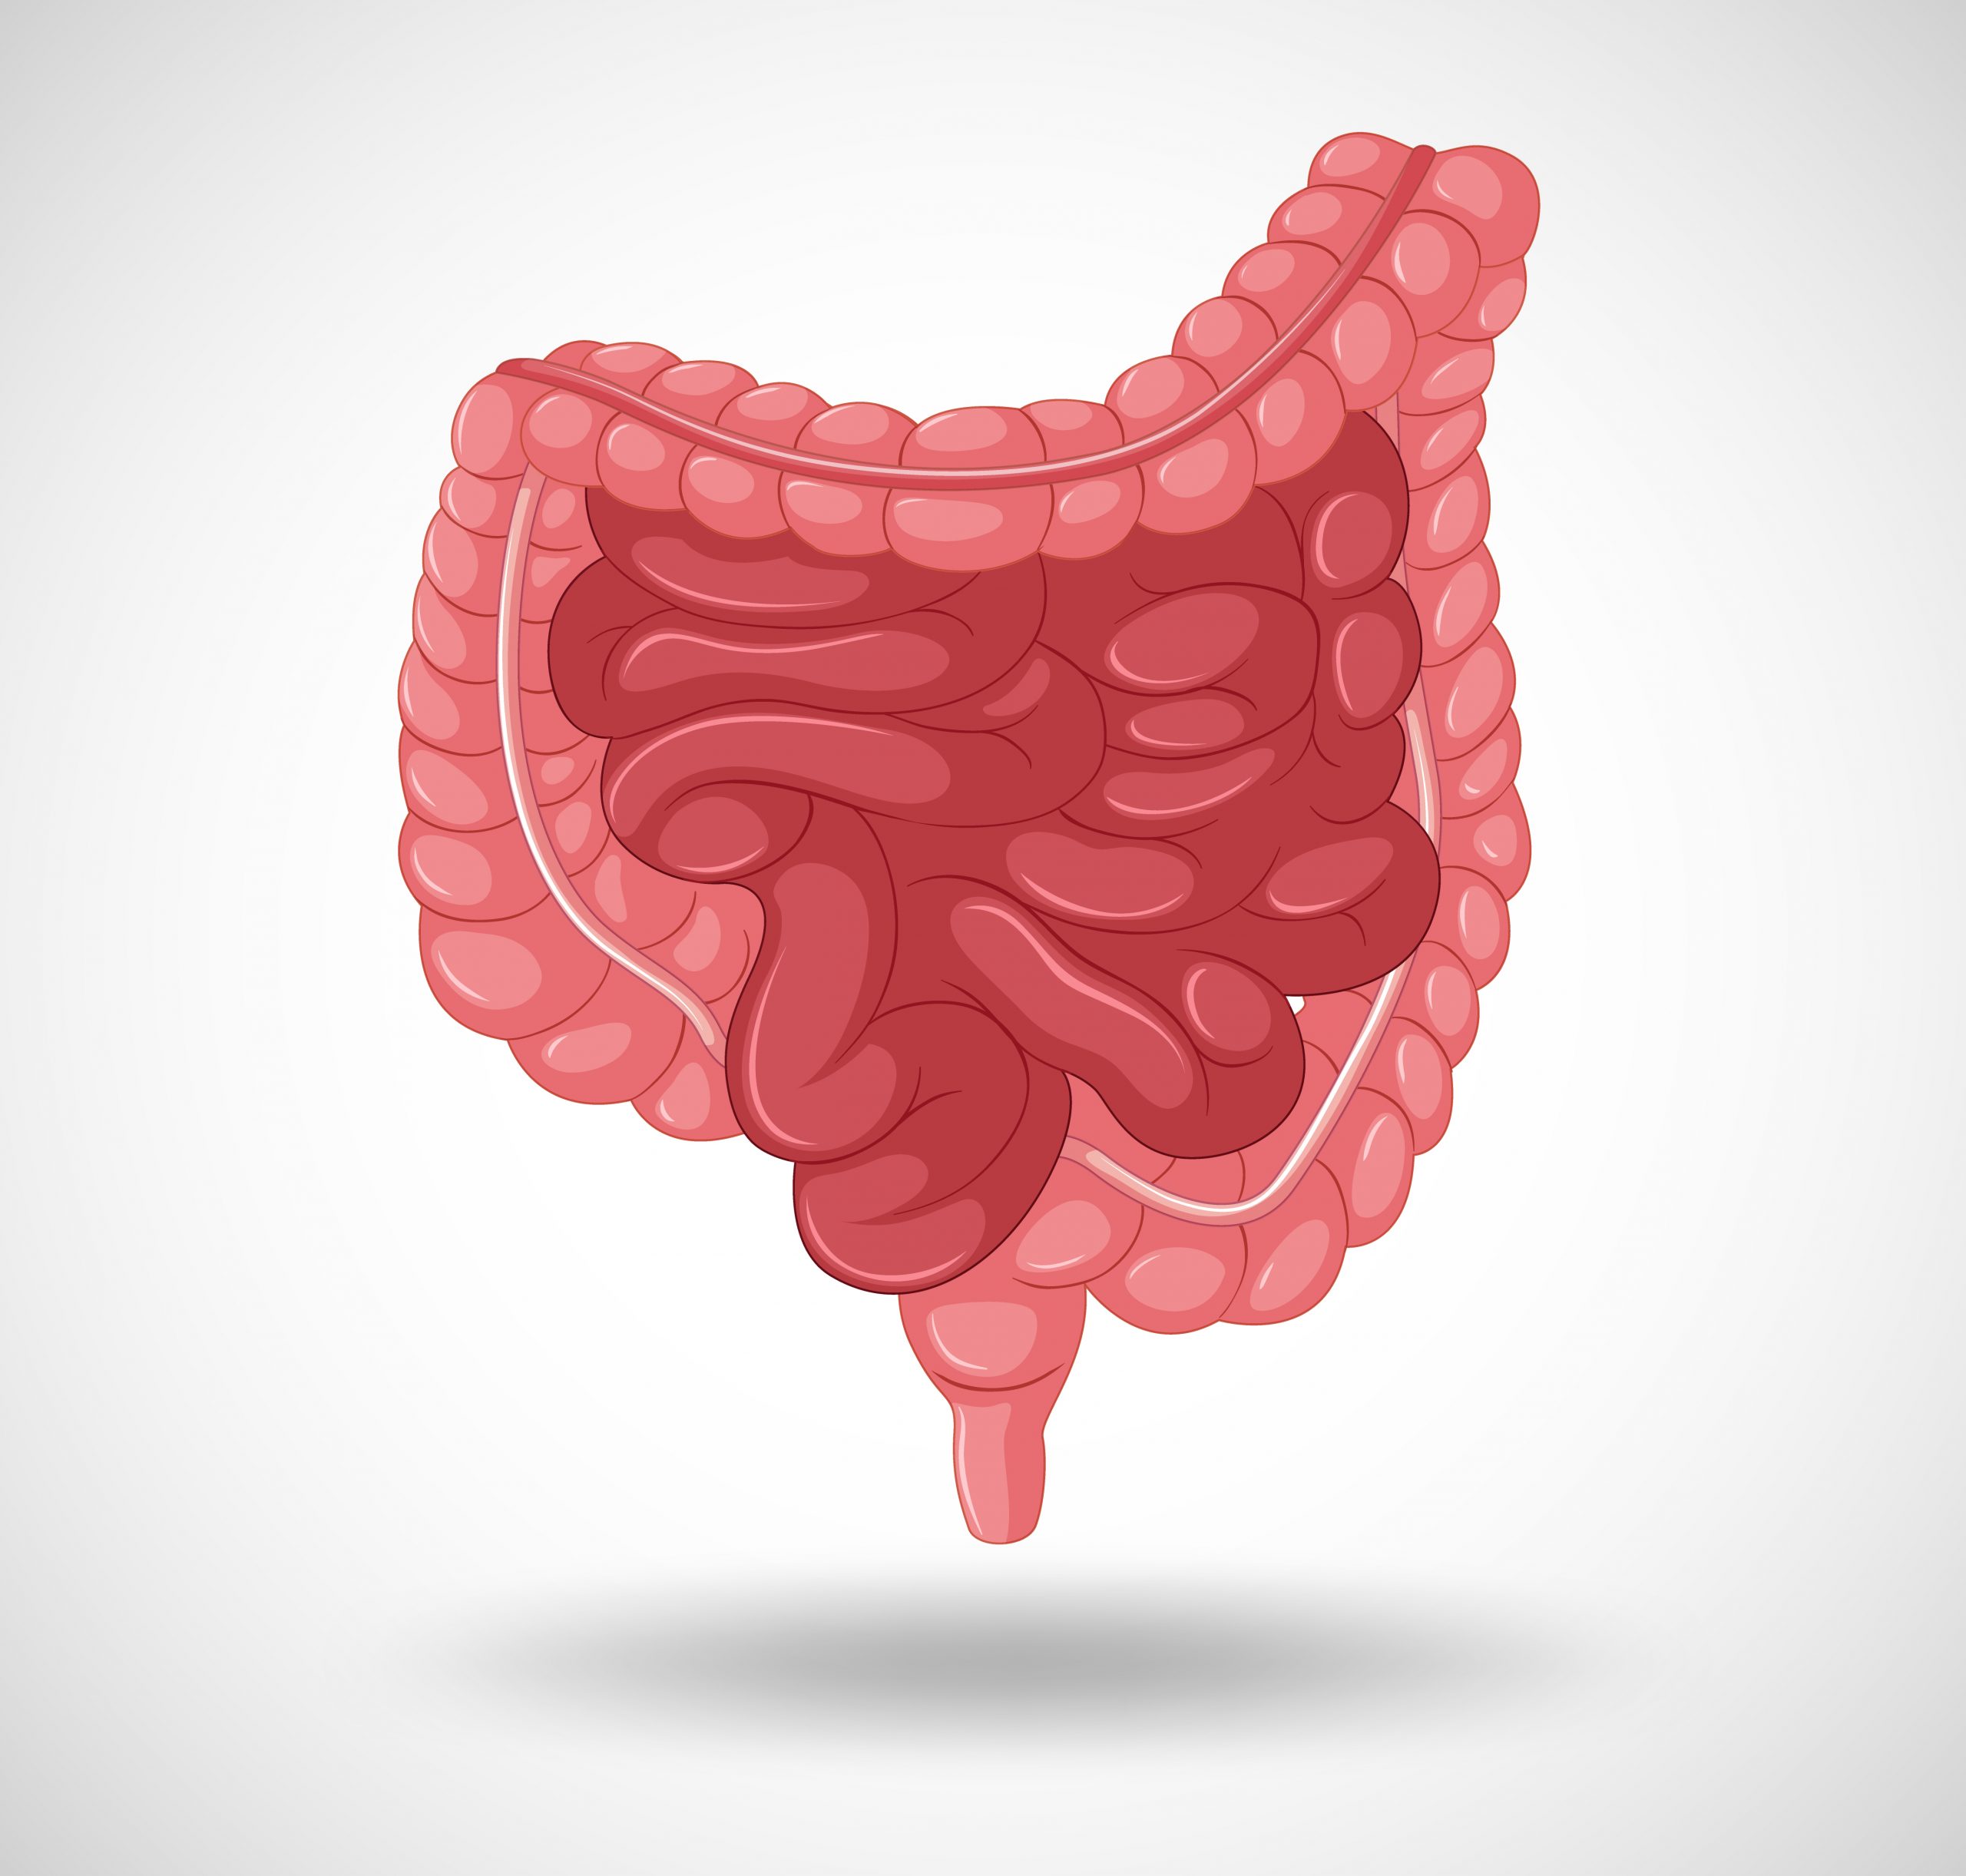 Driver of Inflammatory Bowel Disease Unveiled